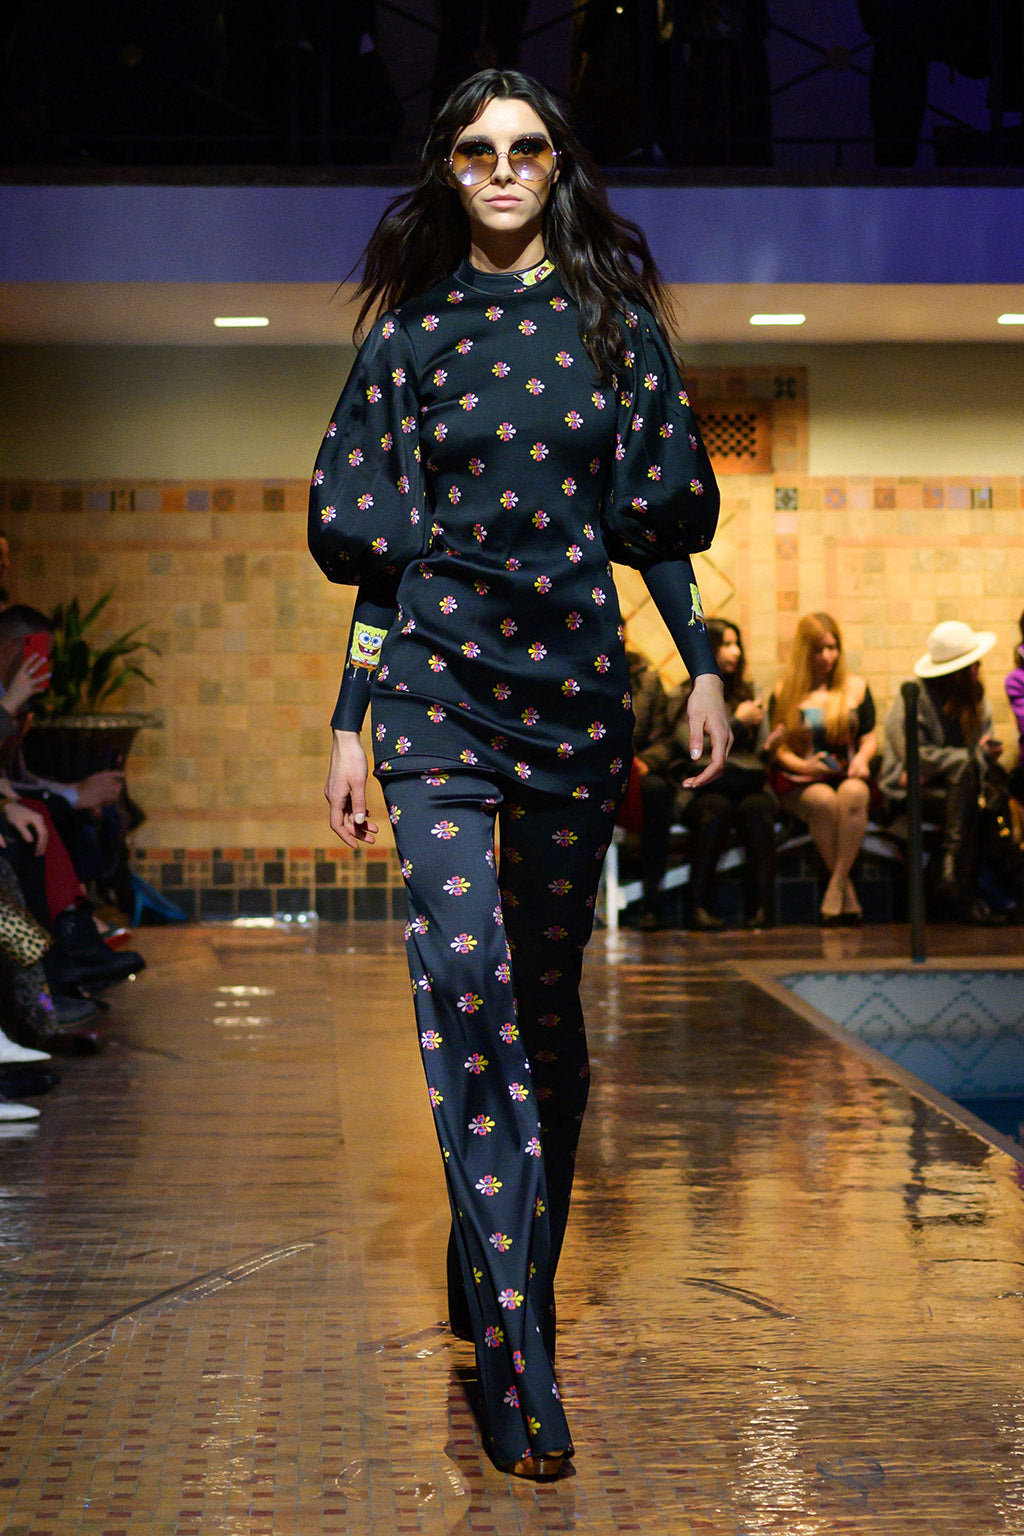 Cynthia Rowley Fall 2019 look 4 featuring a blouse in floral print with elbow length sleeves worn over a SpongeBob print Wetsuit, and pants in floral print